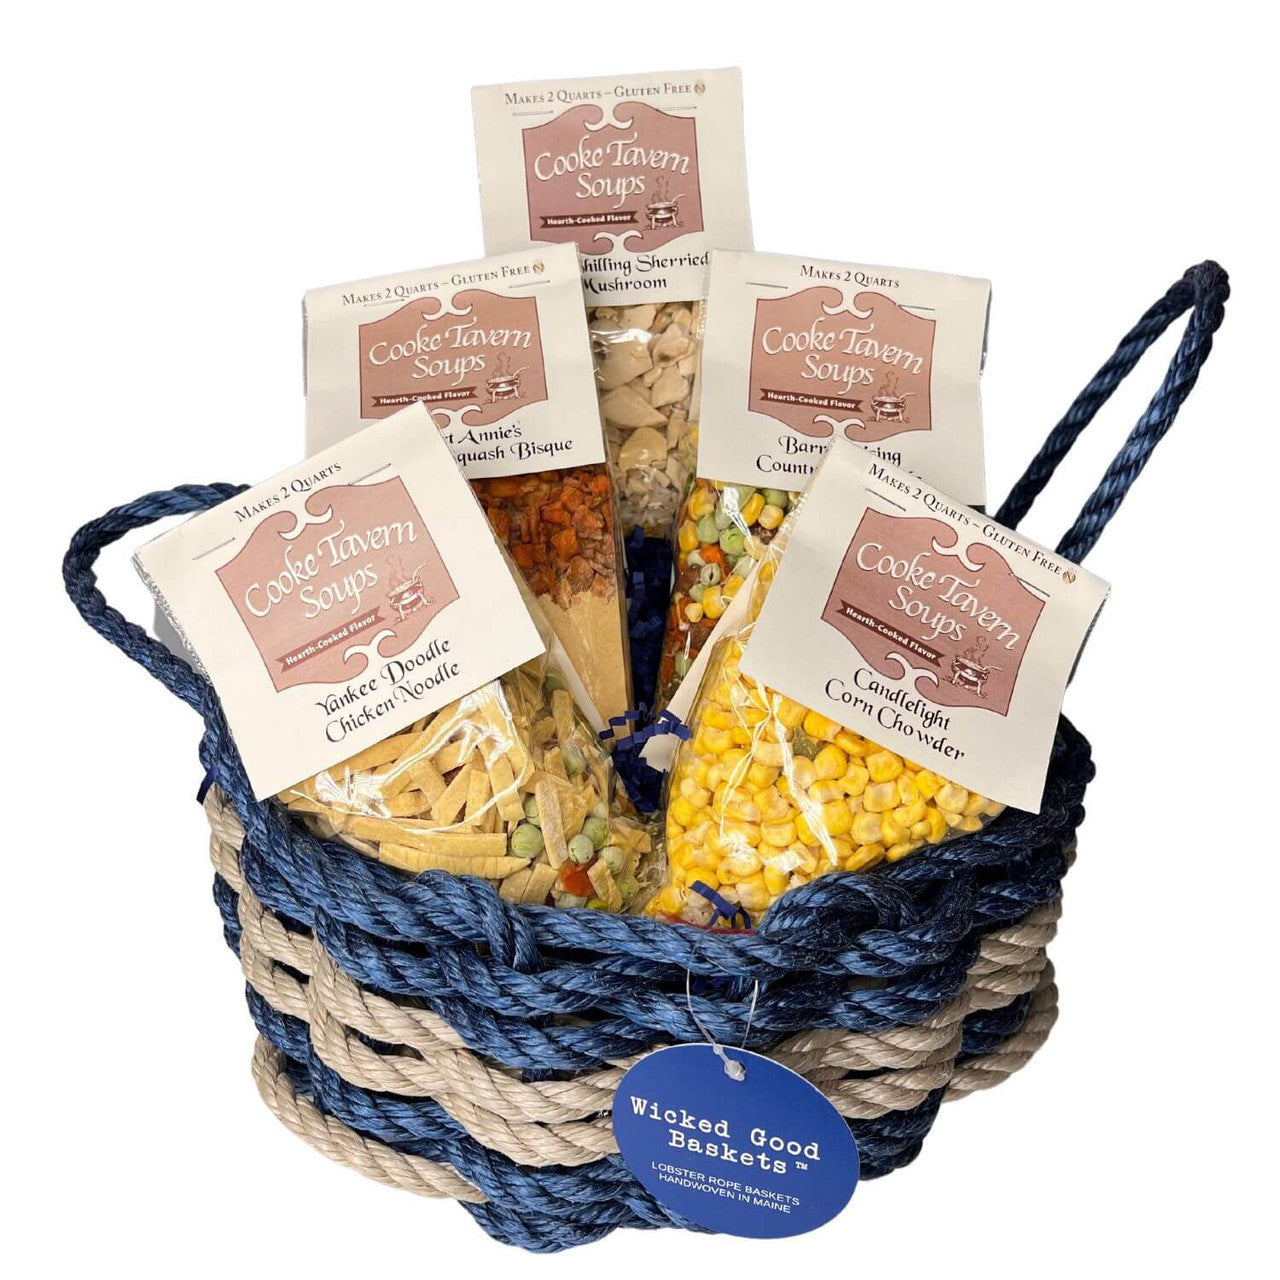 New England Chowder Lobster Rope Gift Basket Food Gift Baskets The New England Trading Company   